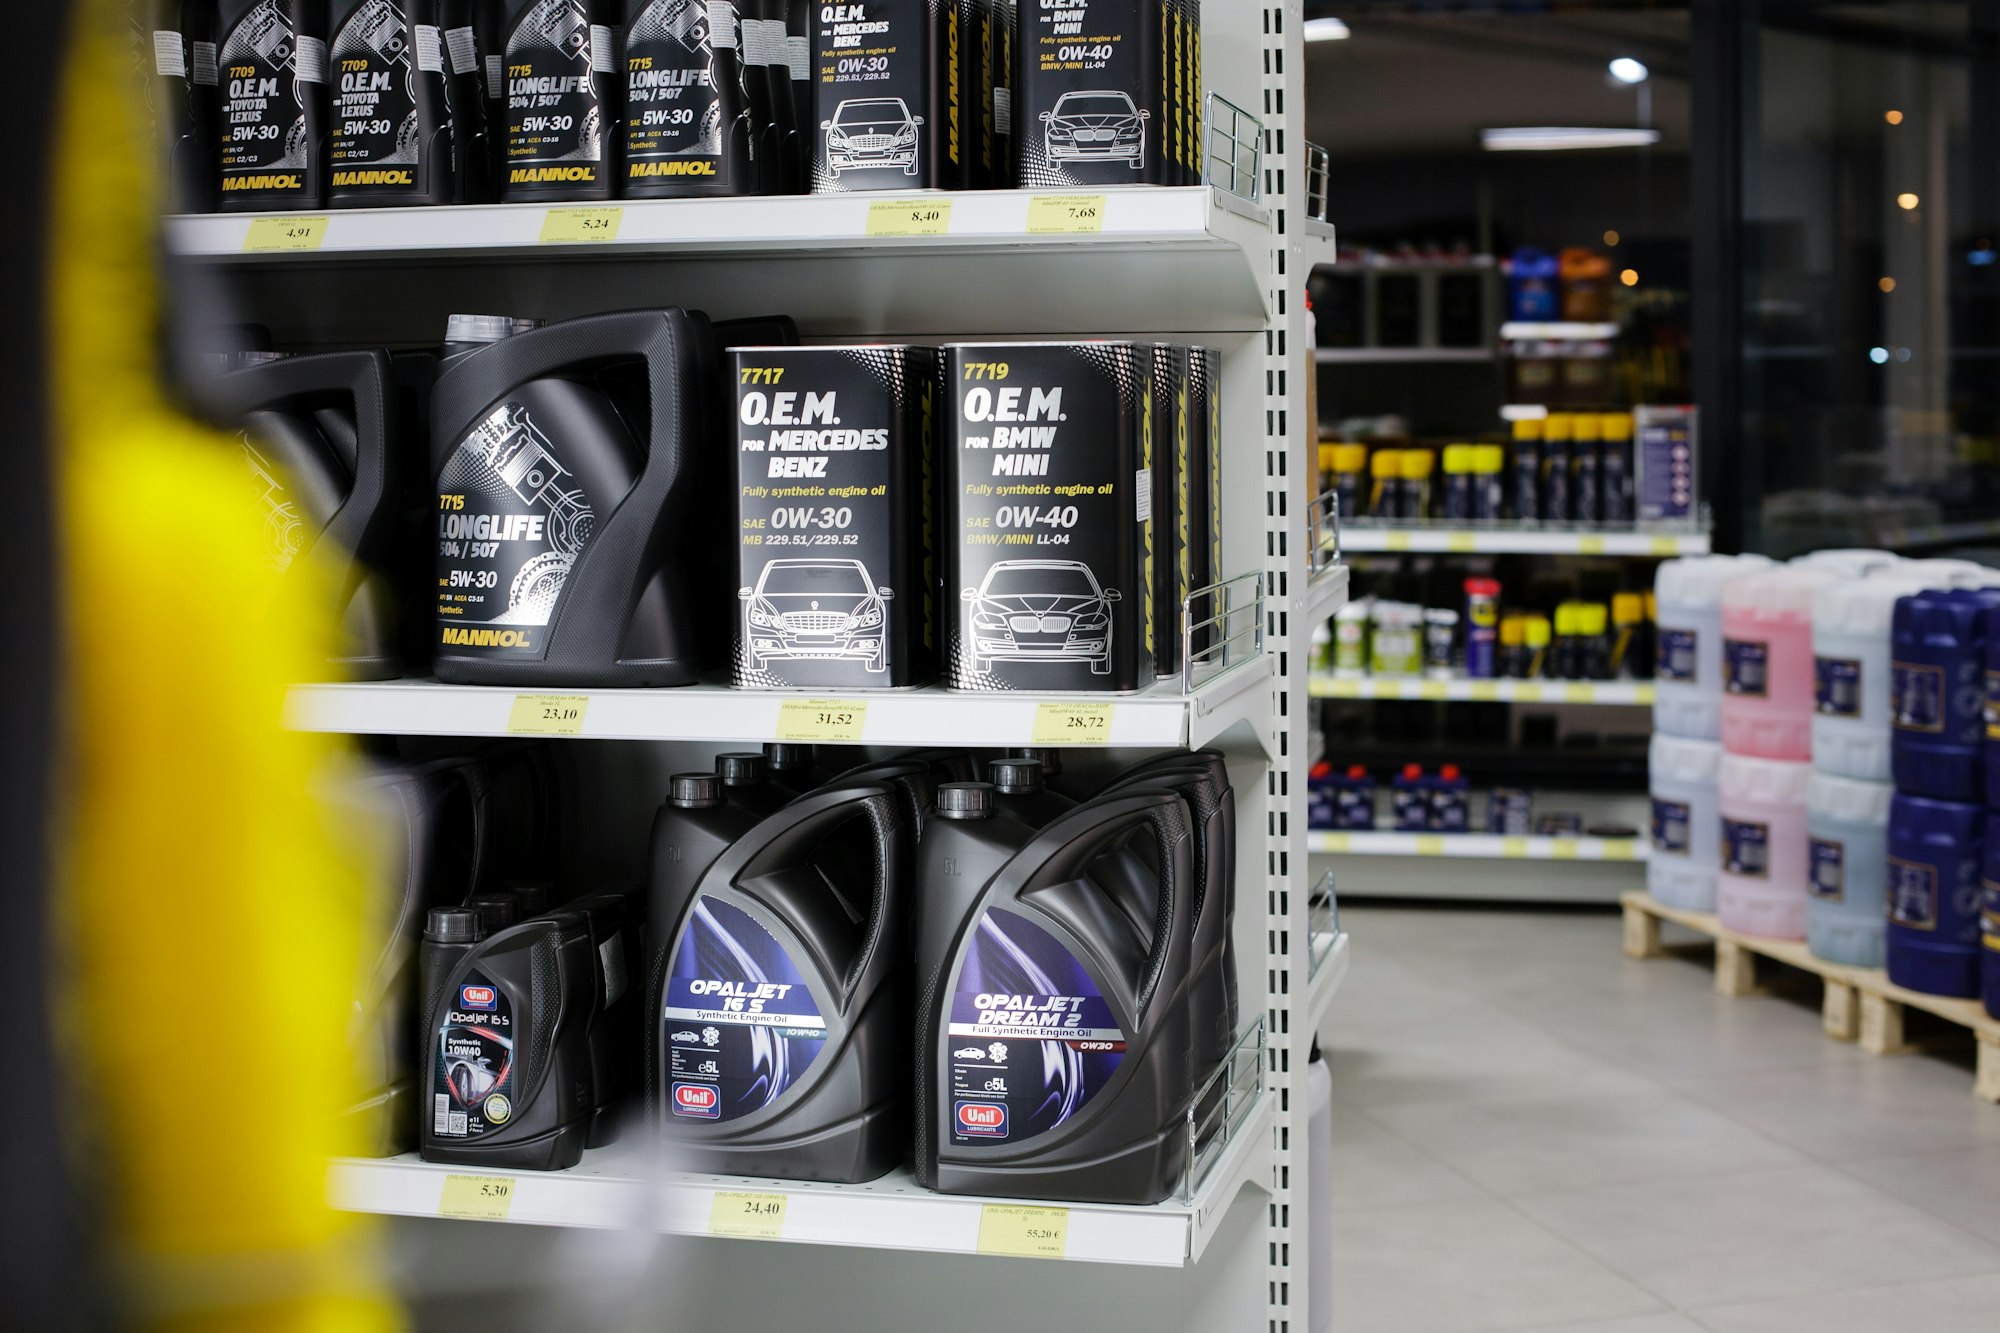 Automotive shop interior. Motor oil product shelf. Good for illustration in automotive editorials and blogs.